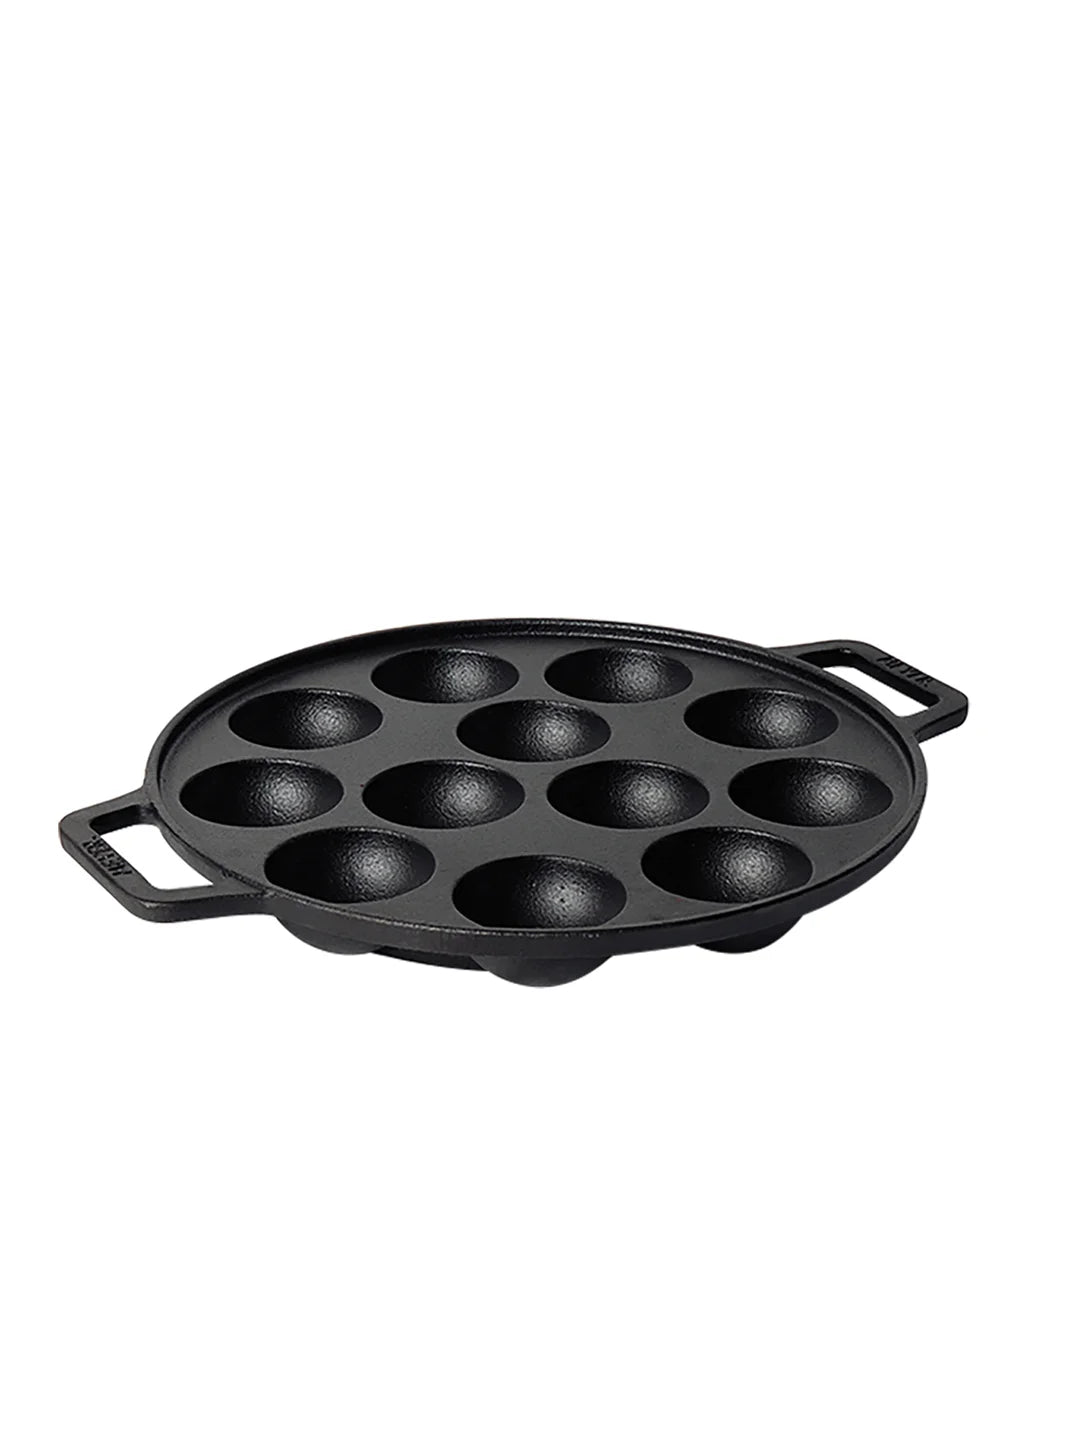 Shop Prestige Cast Iron Appam Pan 26 CM, Duel Handle Appam Pan with Glass  Lid with, Pre Seasoned Induction Cookware Black - PR48908 Online